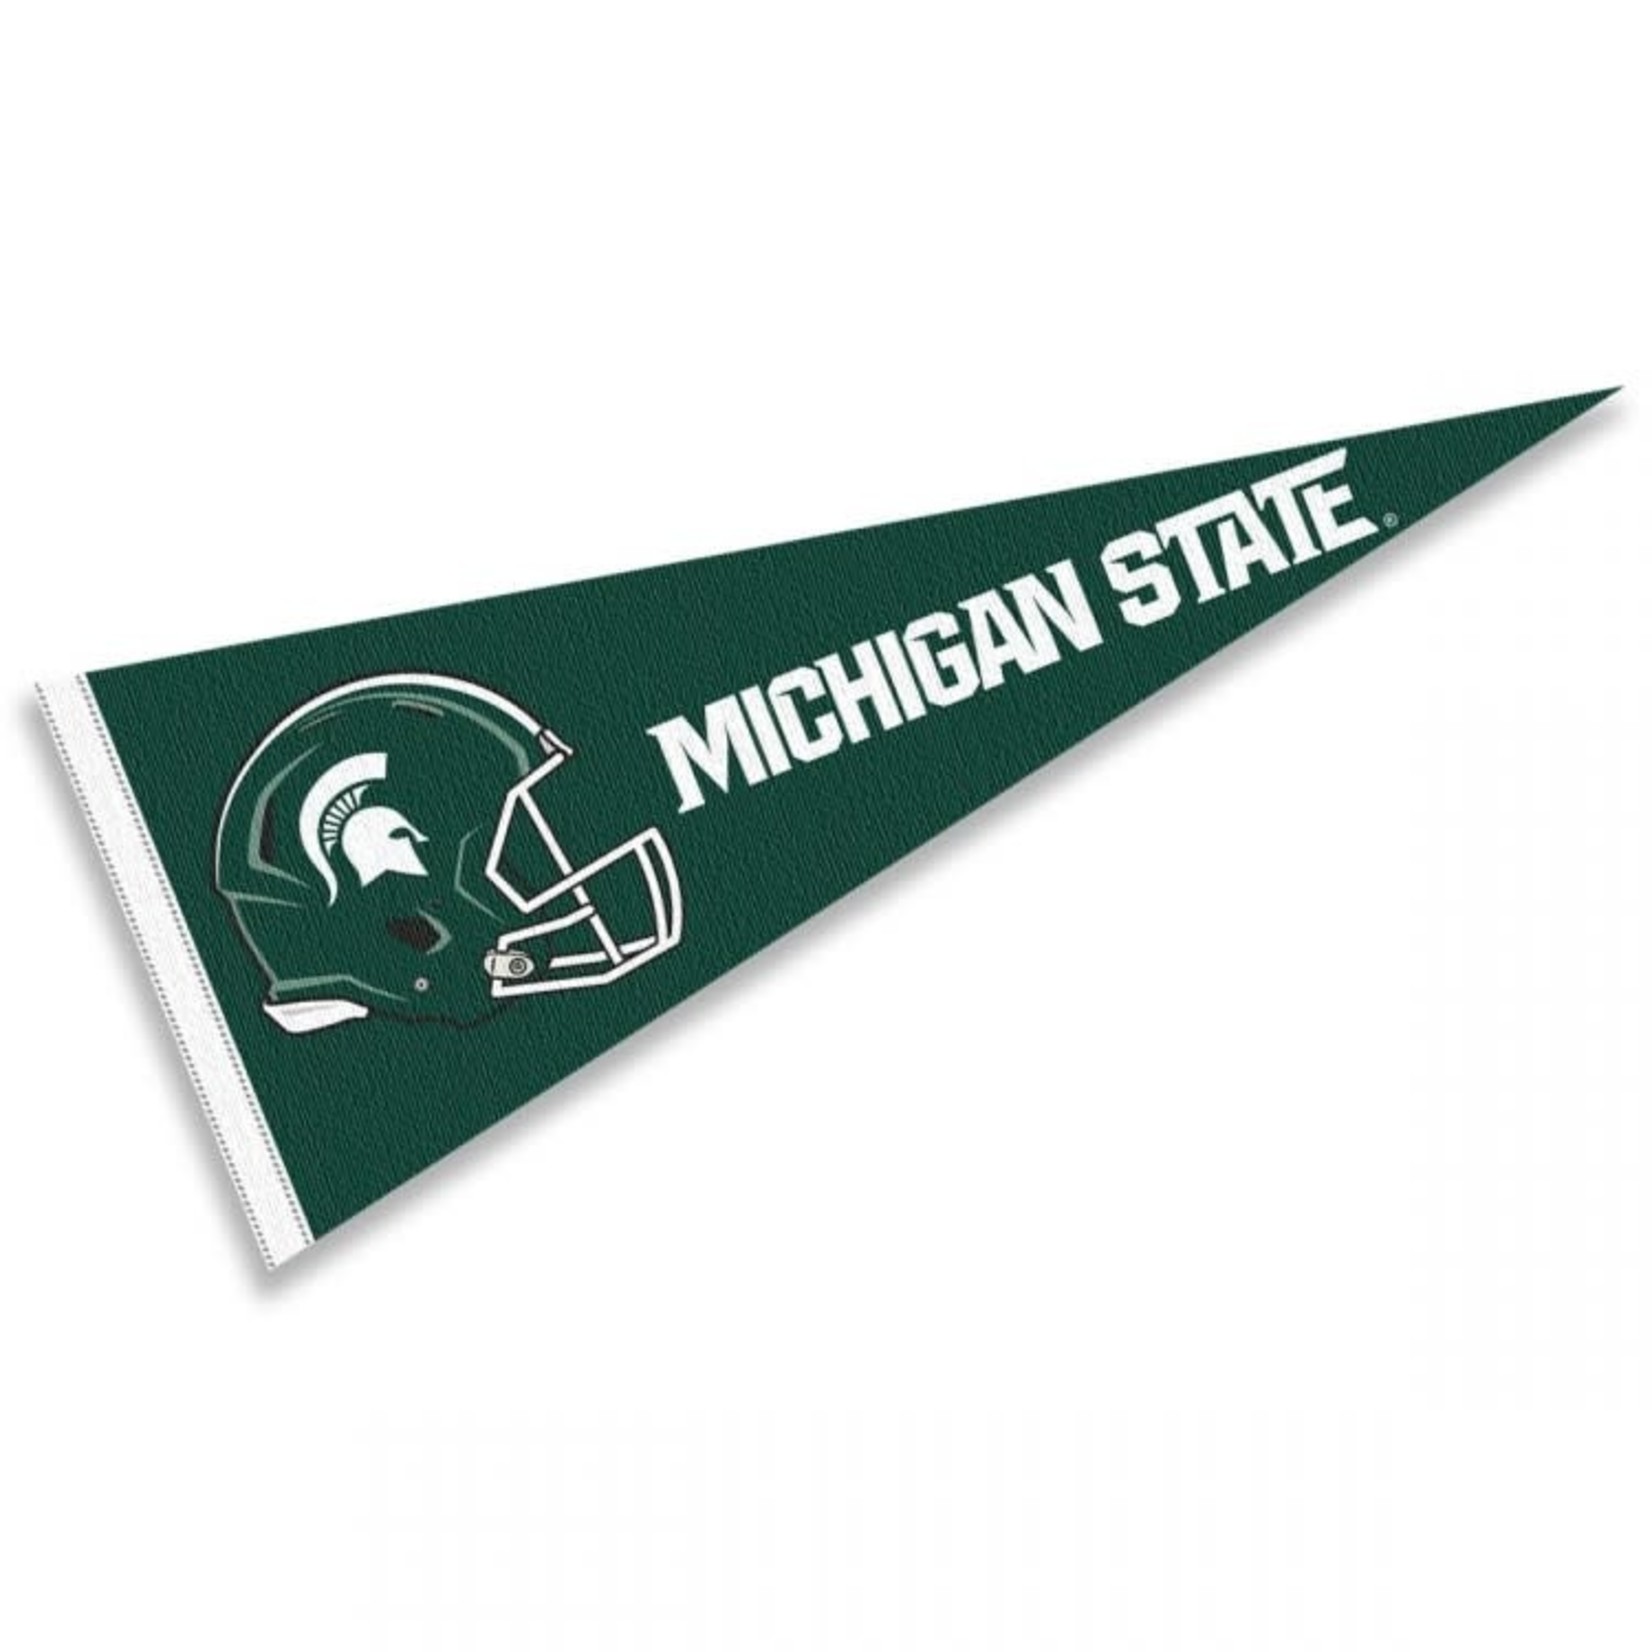 Sewing Concepts NCAA Michigan State Spartans Football Helmet Pennant 12''x30''